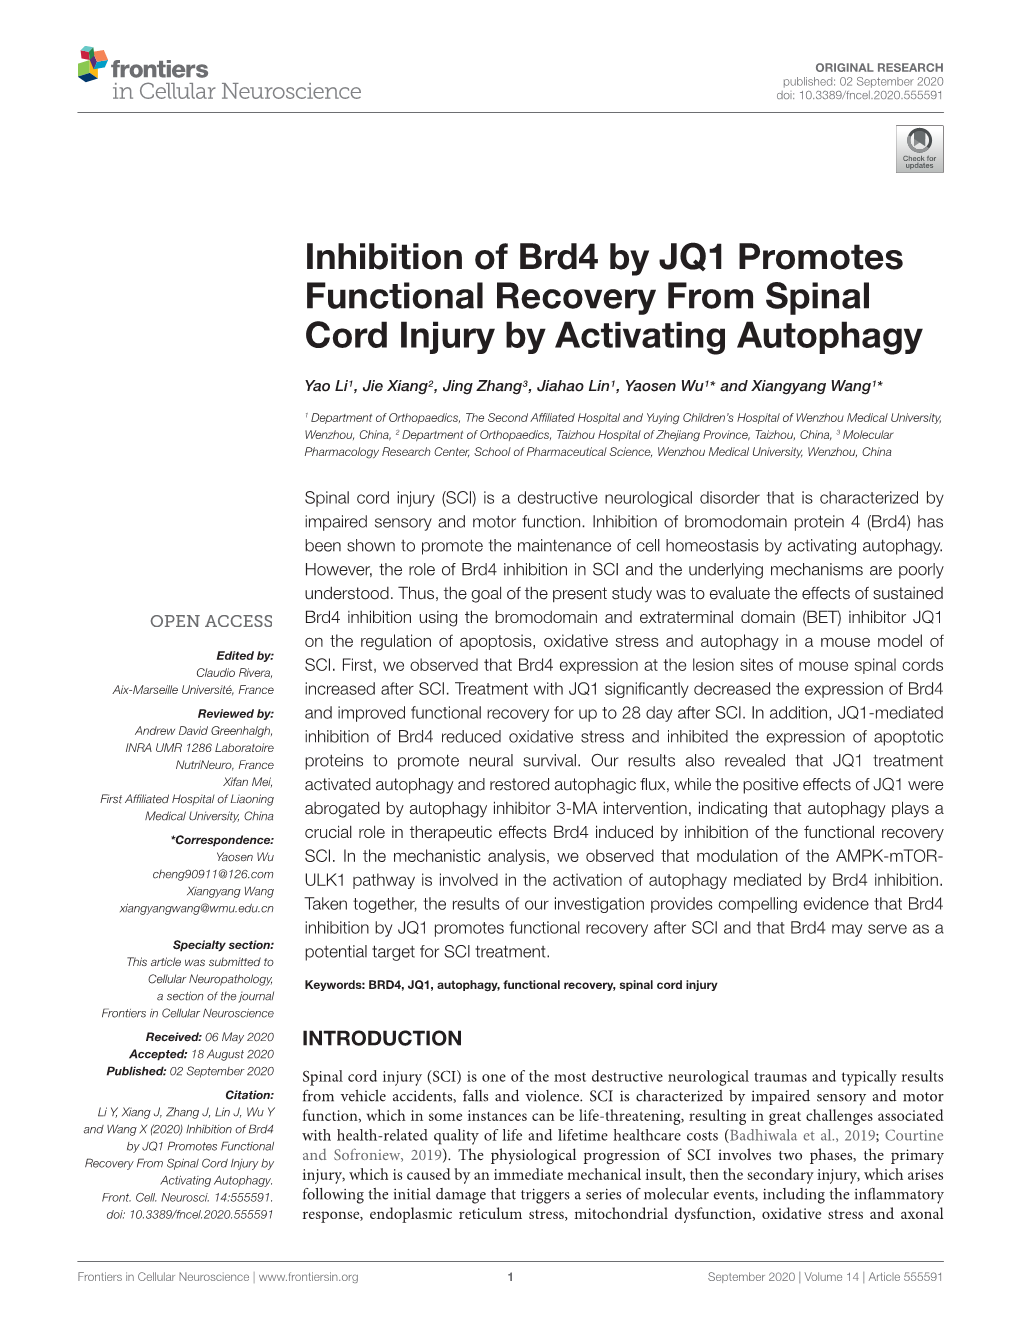 Inhibition of Brd4 by JQ1 Promotes Functional Recovery from Spinal Cord Injury by Activating Autophagy